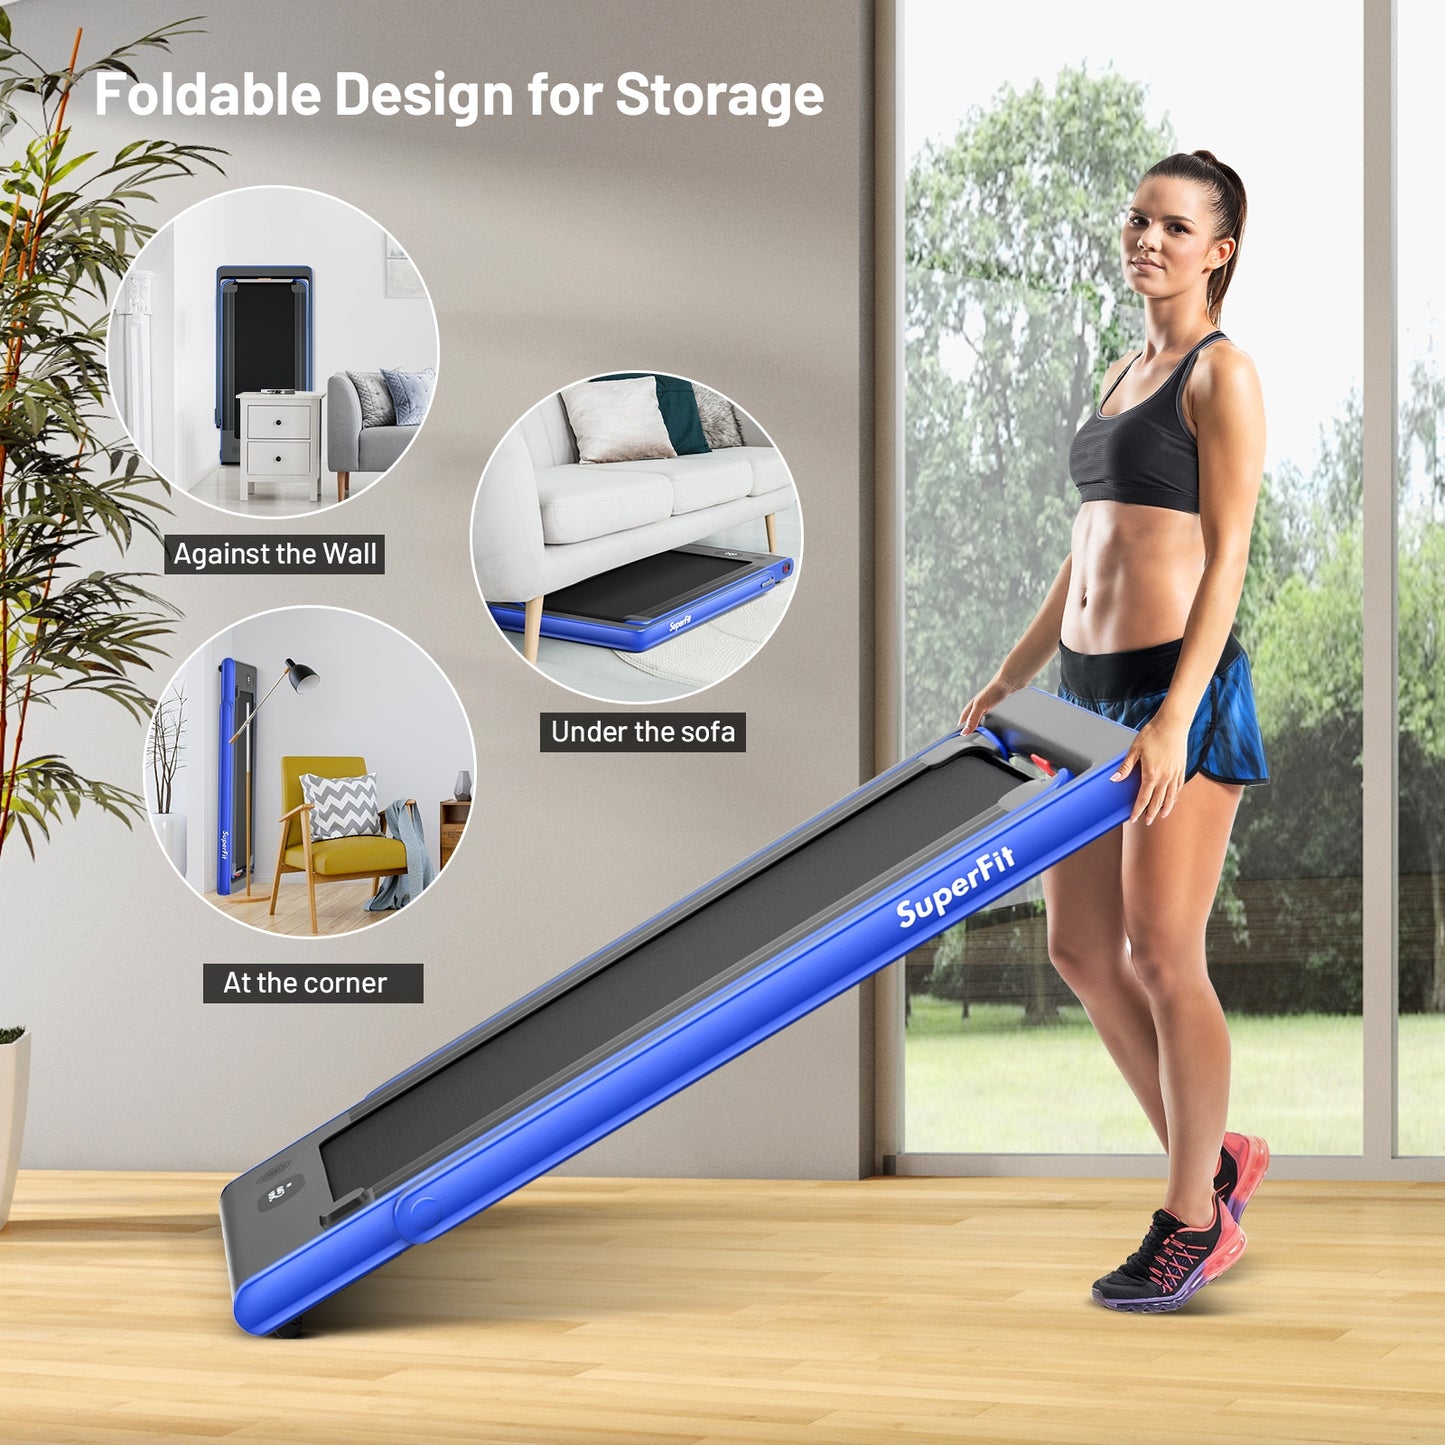 2-in-1 Electric Motorized Health and Fitness Folding Treadmill with Dual Display-Blue